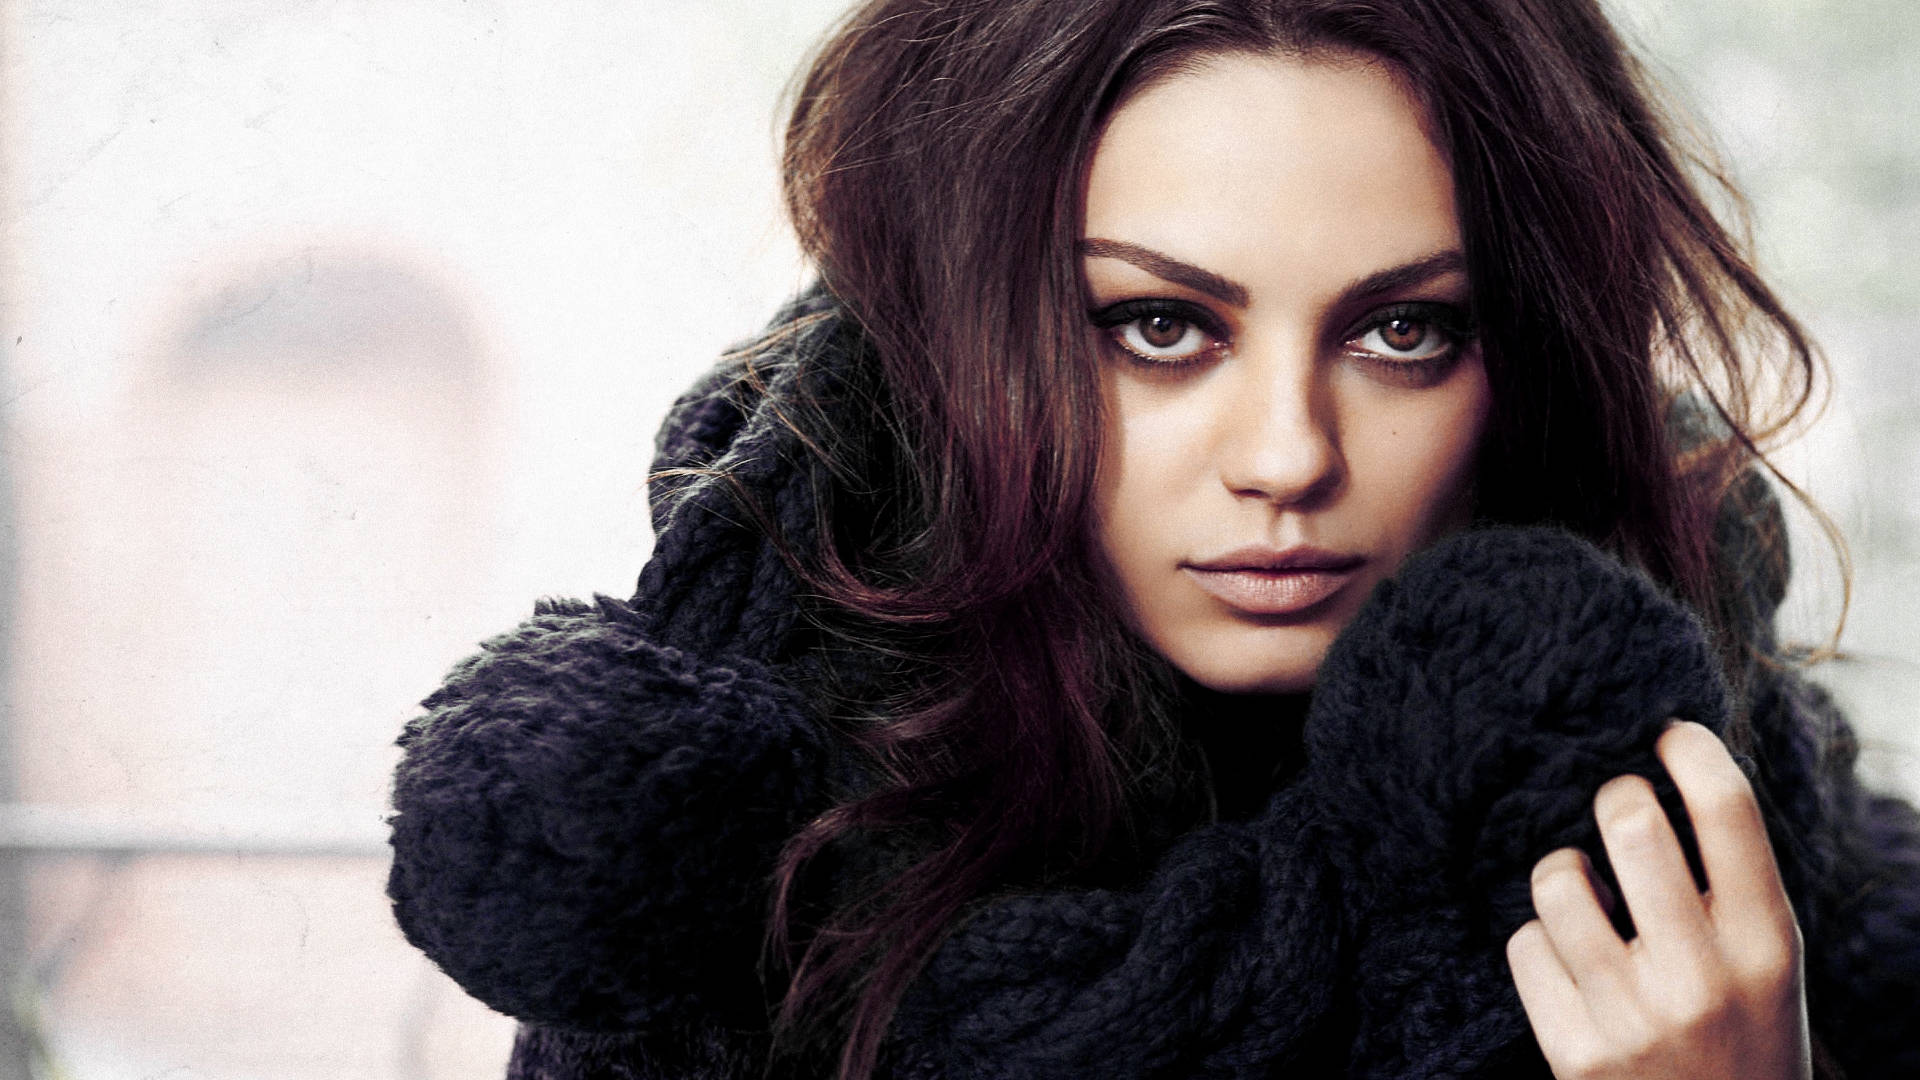 Mila Kunis: Hollywood’s Enigmatic Beauty Wallpaper